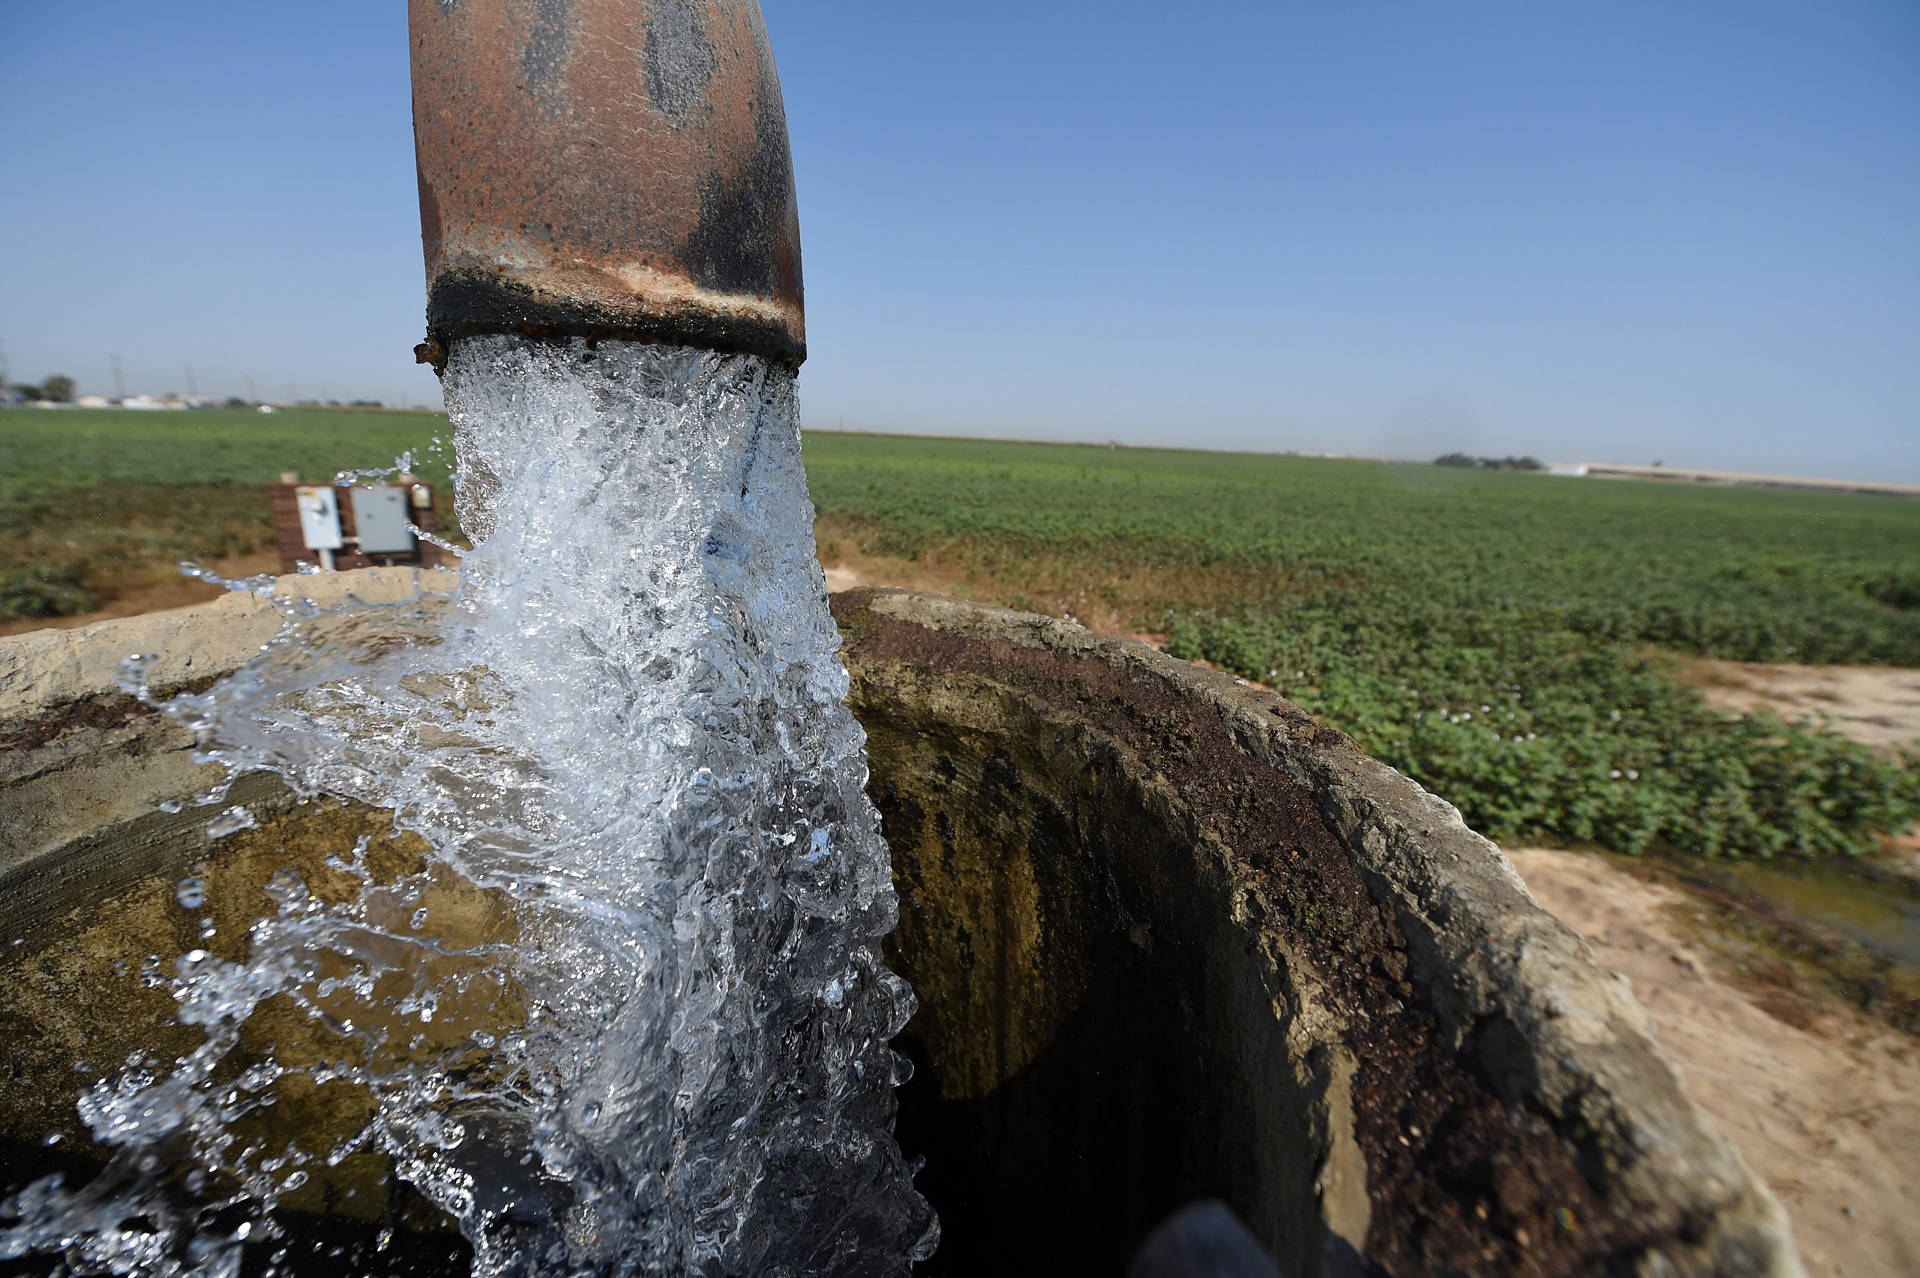 Irrigation water flows at a cotton field in Porterville. The nation's largest irrigation district has rejected participation in Gov. Brown's $16 billion plan to build two giant tunnels to re-engineer California's north-south water delivery system. ROBYN BECK/AFP/Getty Images